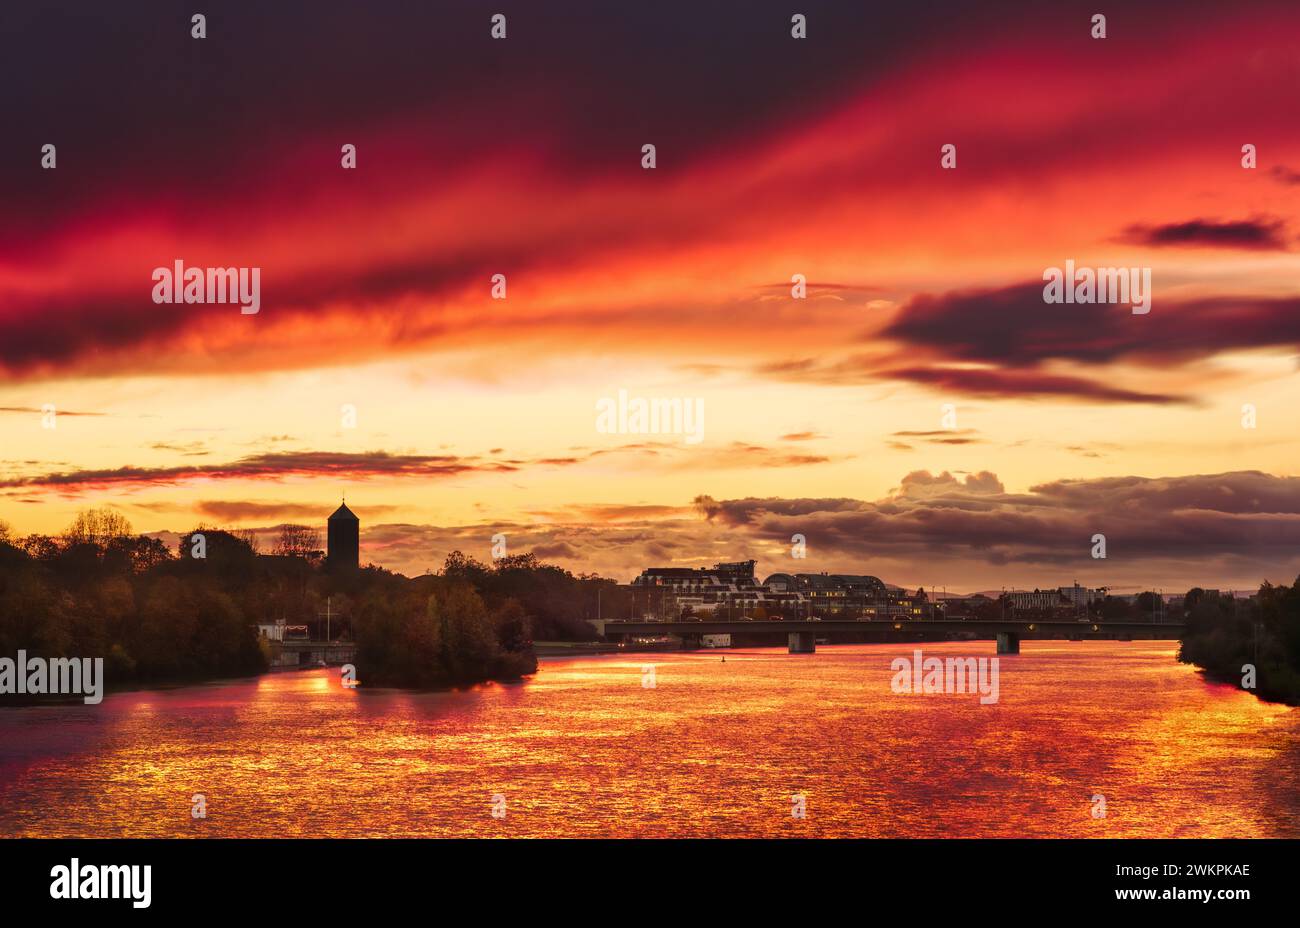 Dramatic stunning red sky at sunset, a romantic scenery over the Neckar river in Heidelberg, Germany Stock Photo